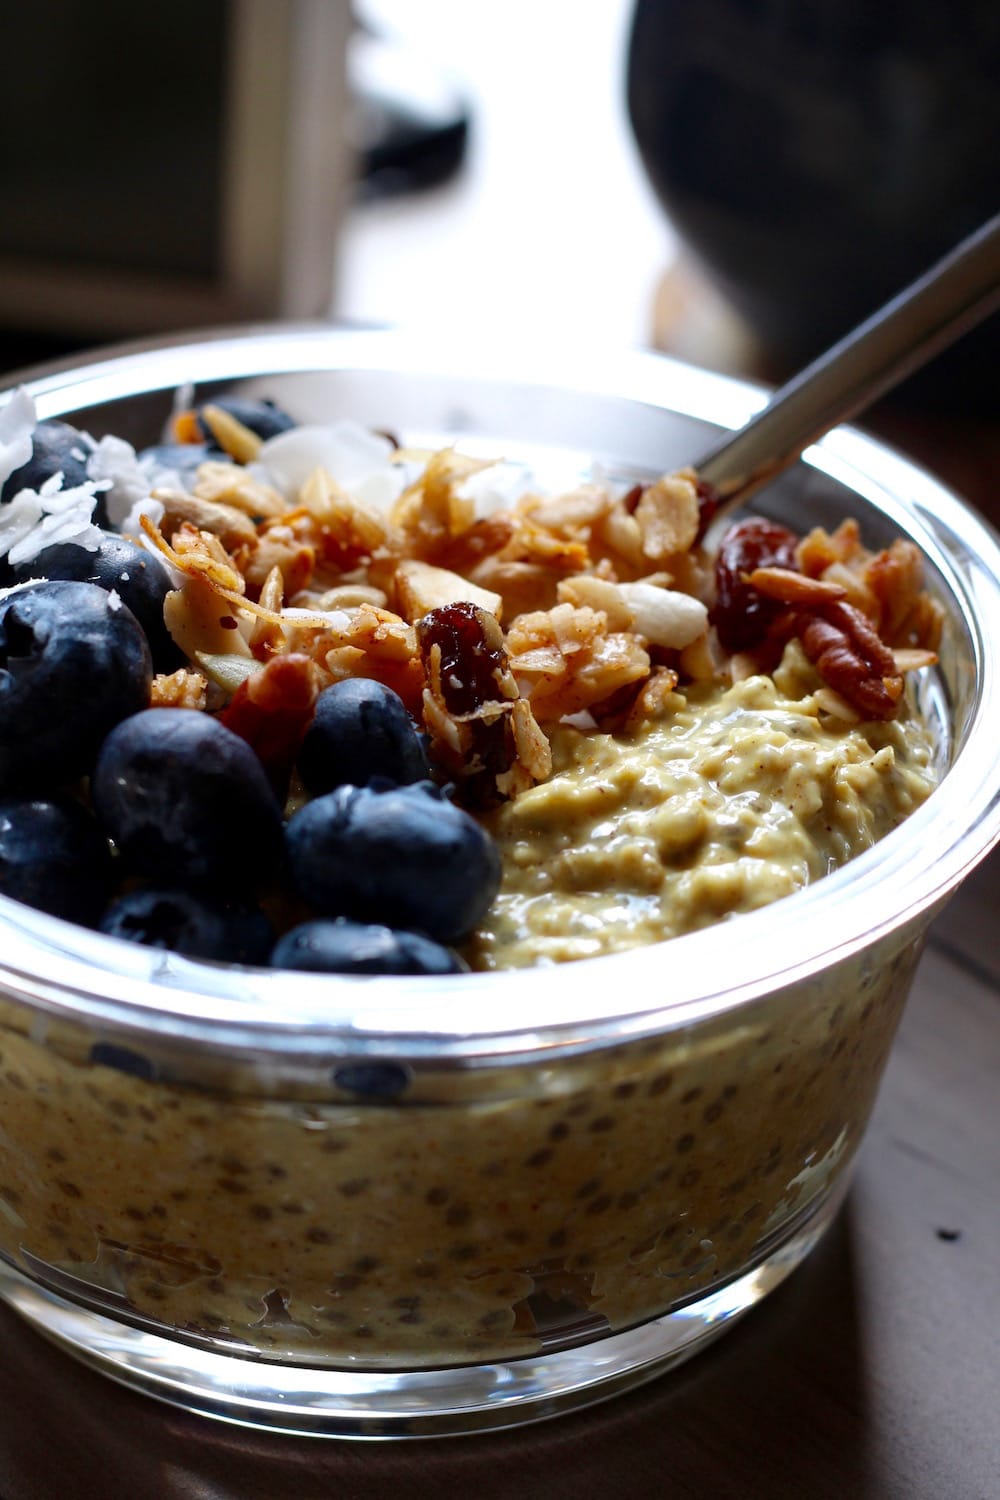 Vegan Golden Milk Overnight Oats in a bowl topped with nuts, raisins and blueberries